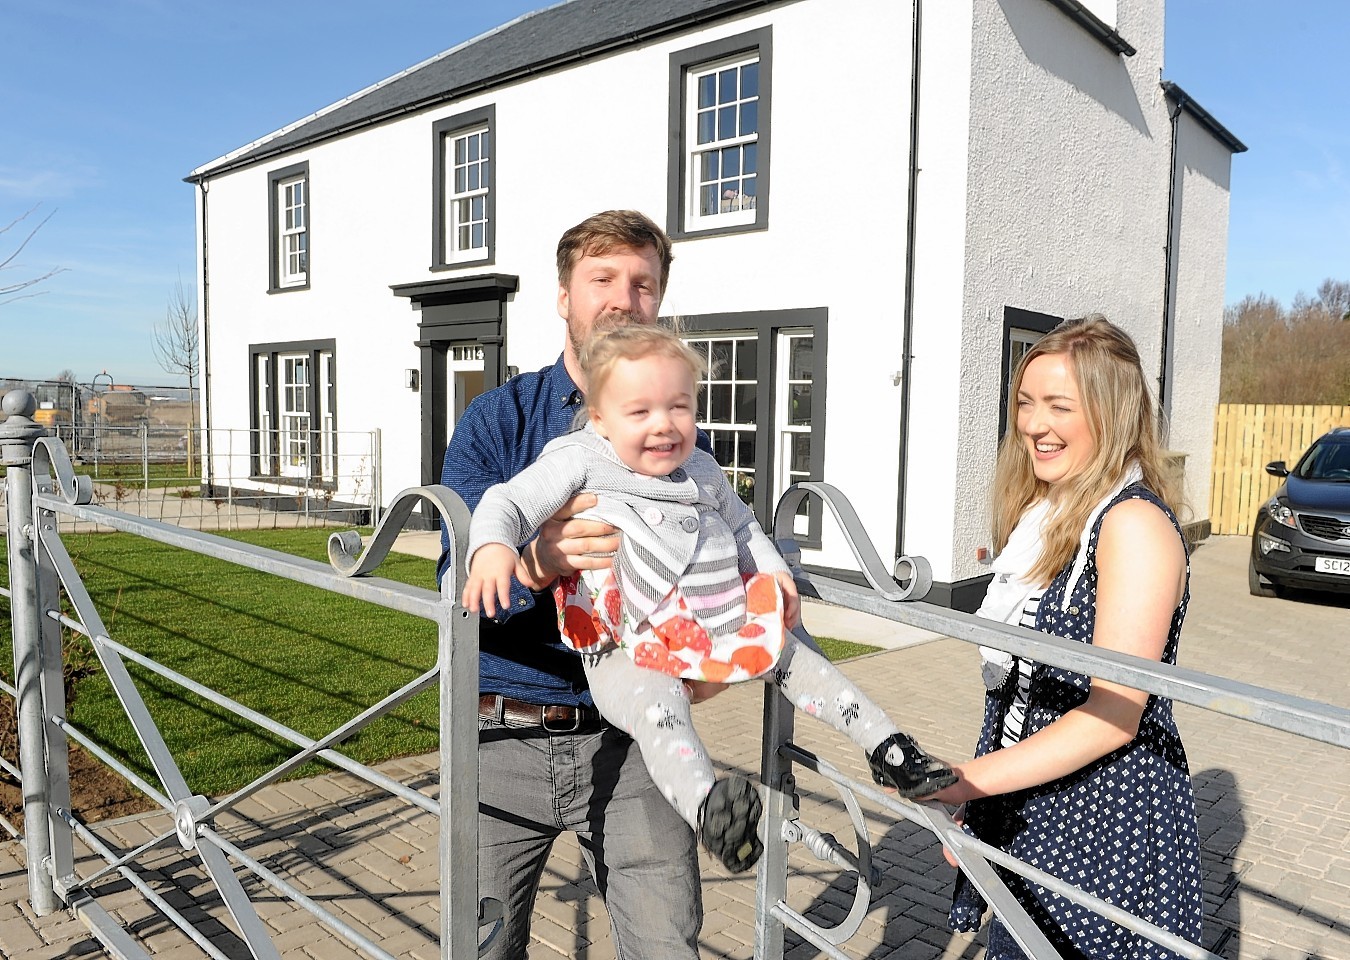 The first residents moved into their new home at Tornagrain last month